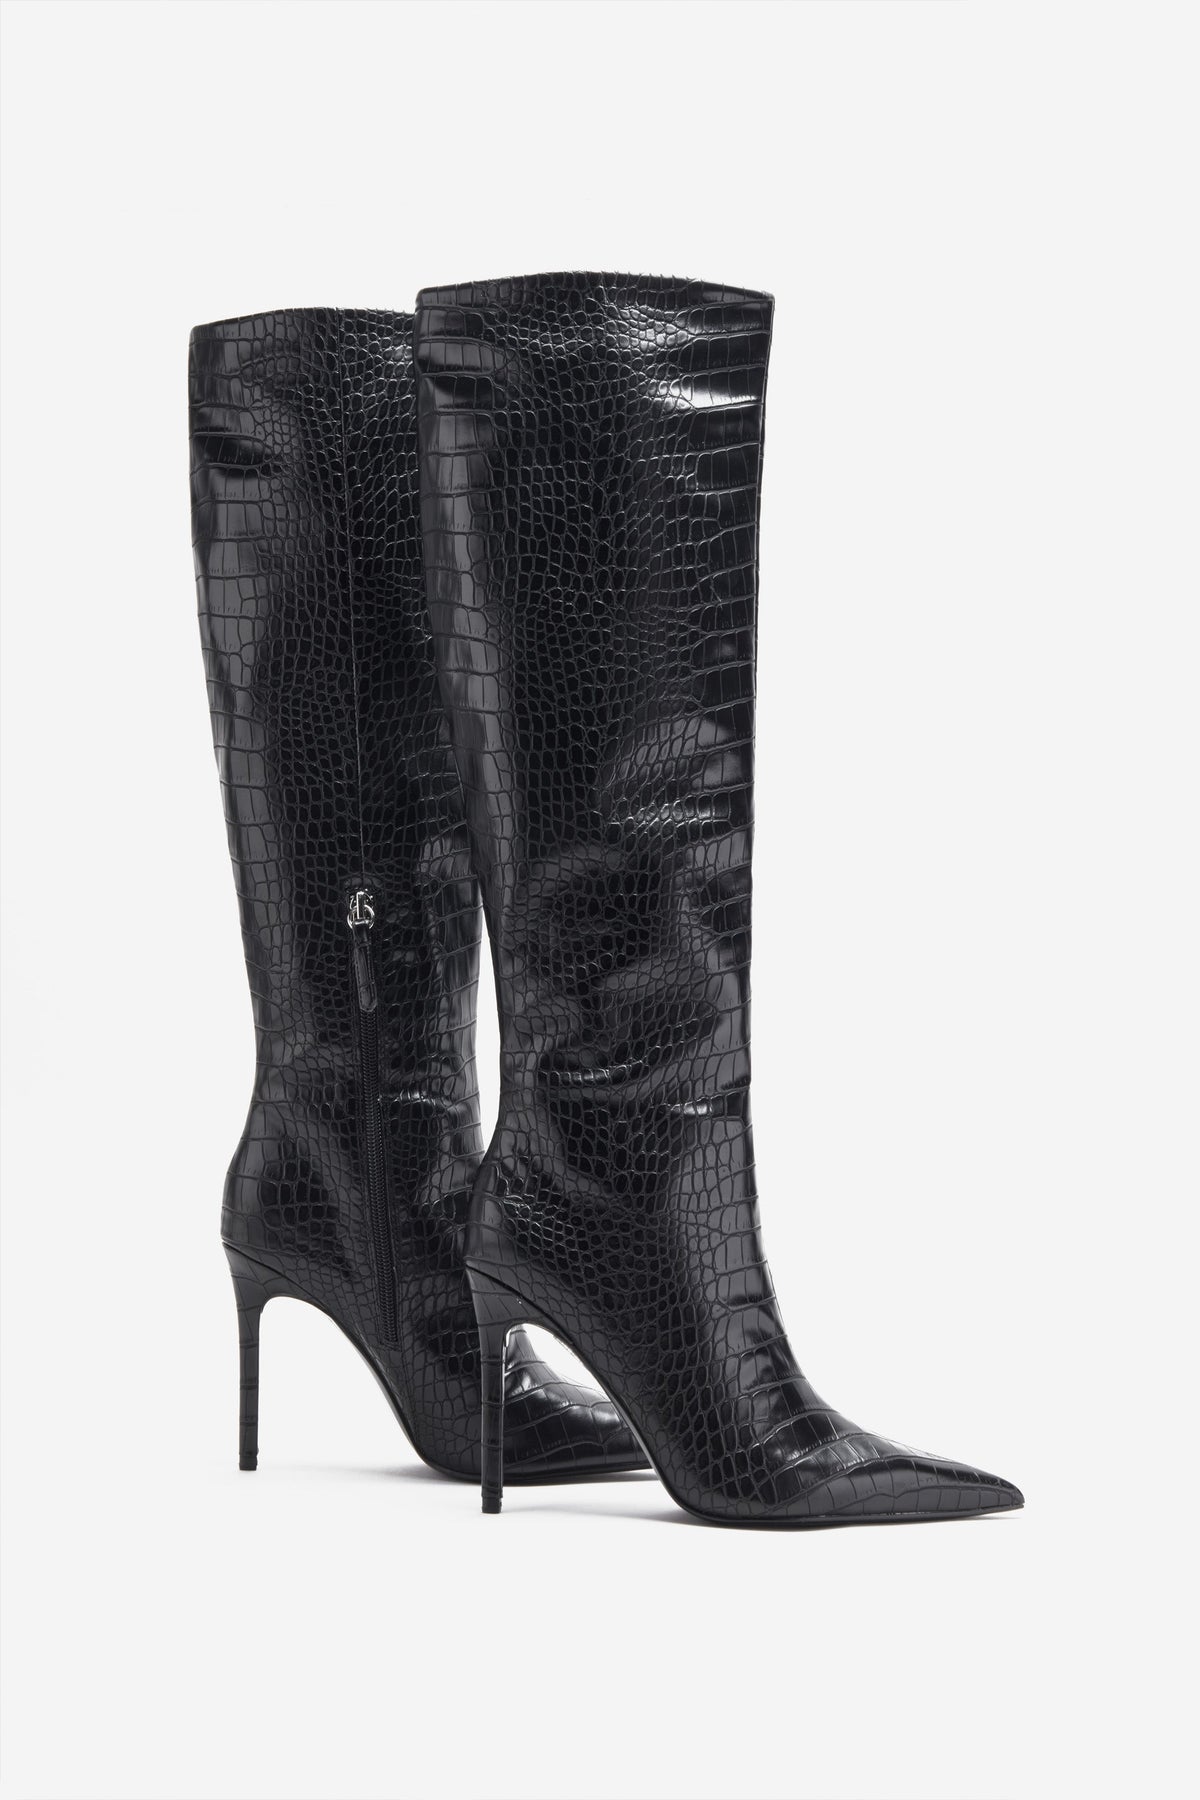 Wide Fit Black Leather-Look Stretch Block Heel Knee High Boots | New Look